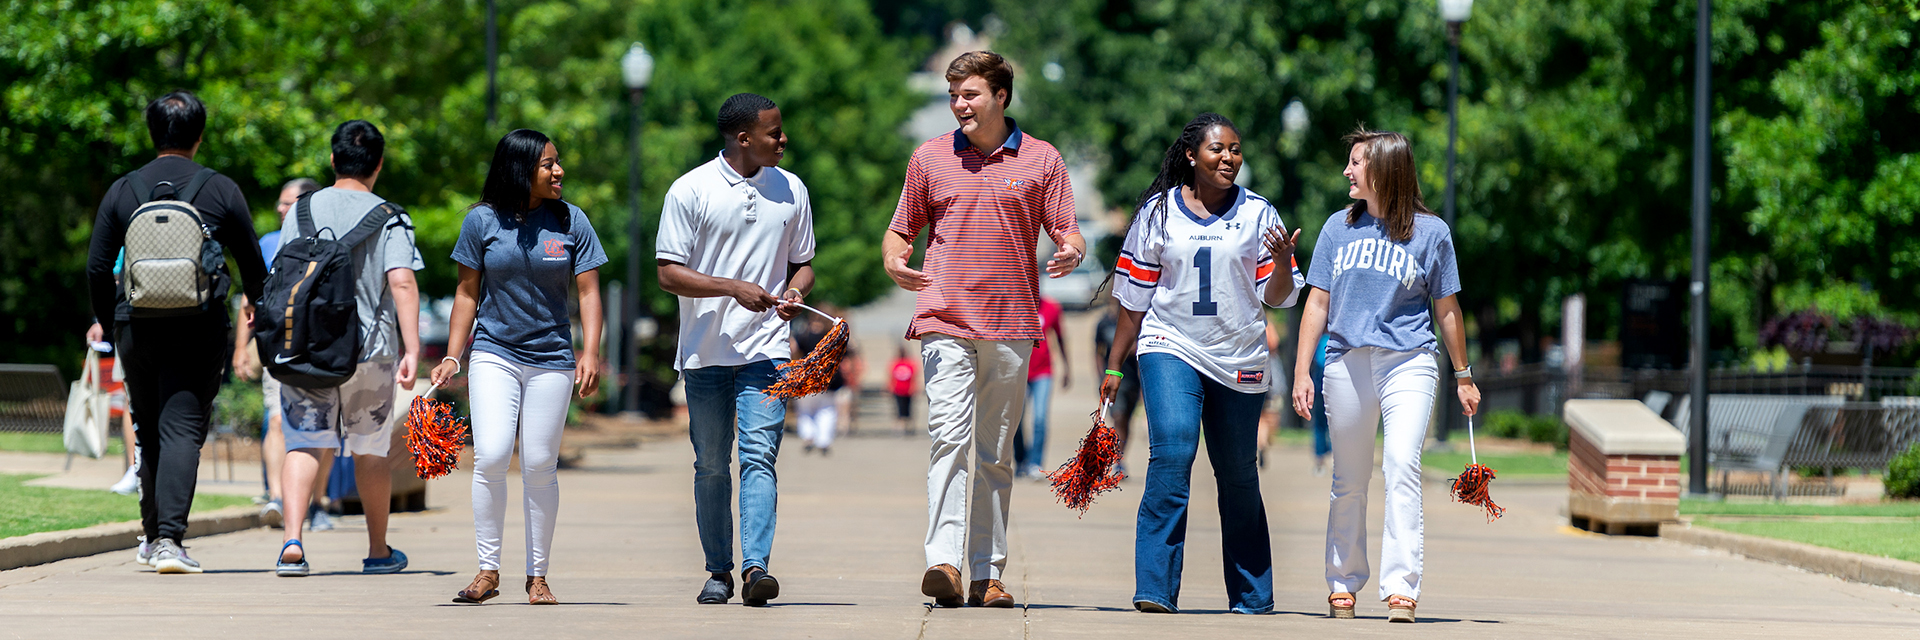 Auburn-Students-walking-together-and-talking-on-Campus-from-Student-Clubs-Organizations-sm